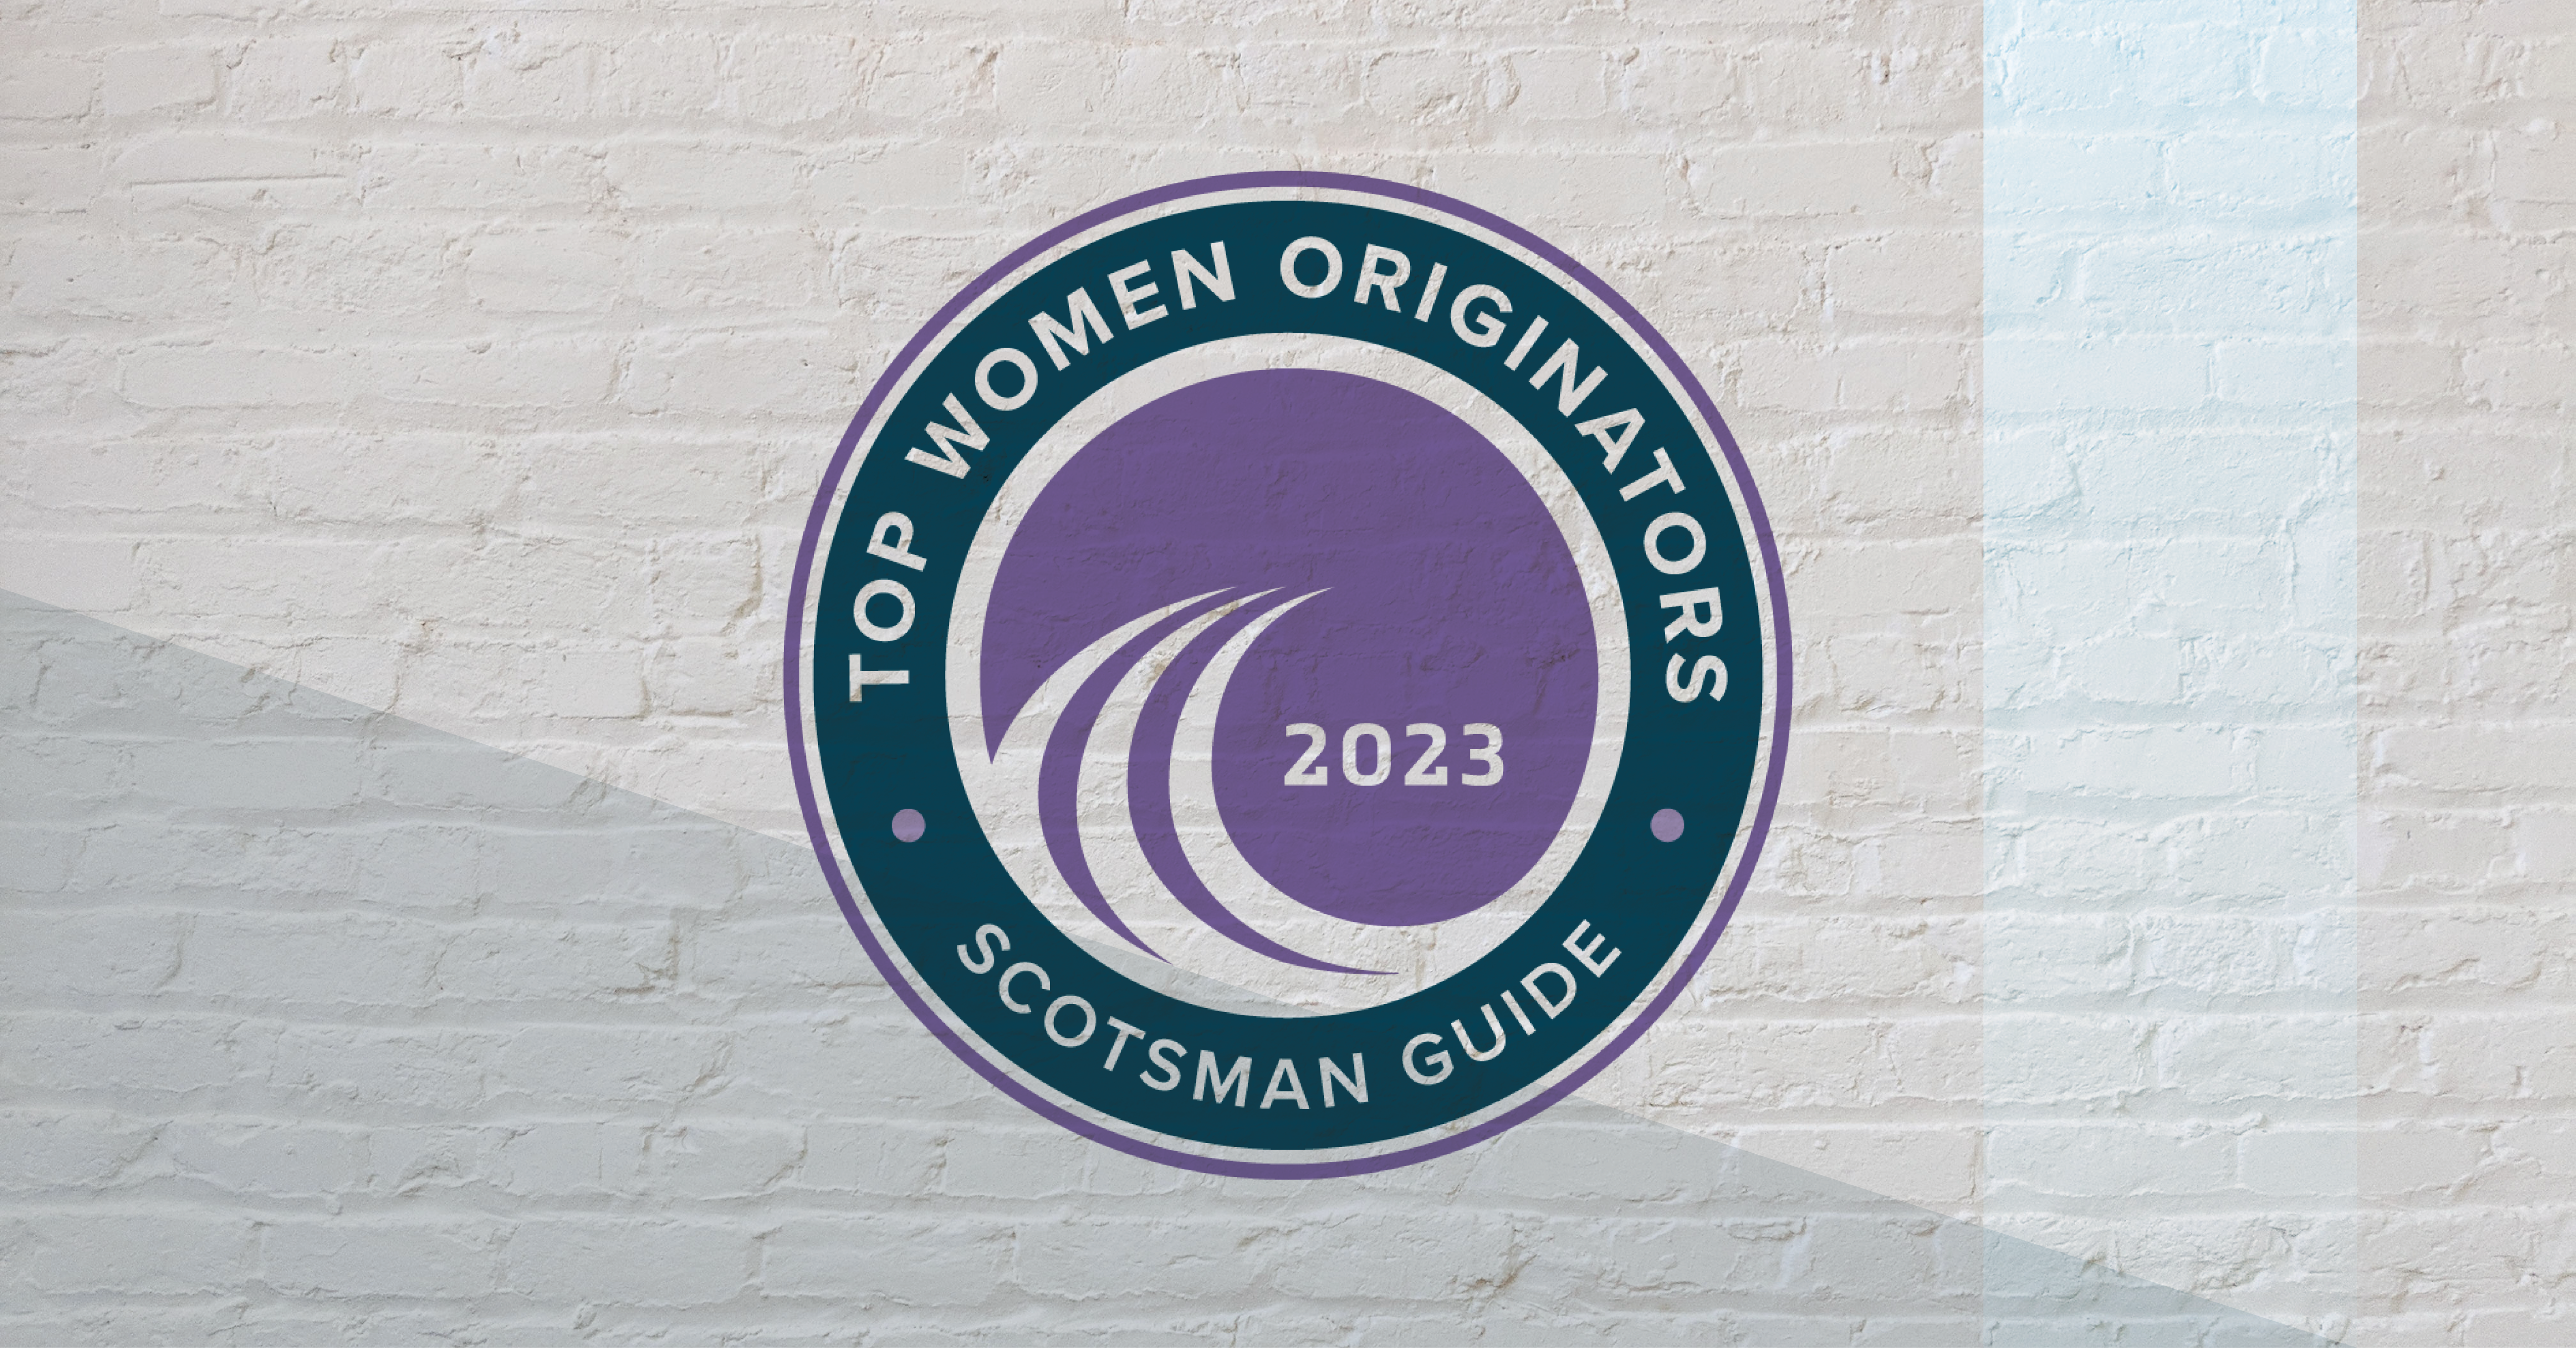 2 Homeowners Mortgage Professionals Named Among Top Women Originators for 2023